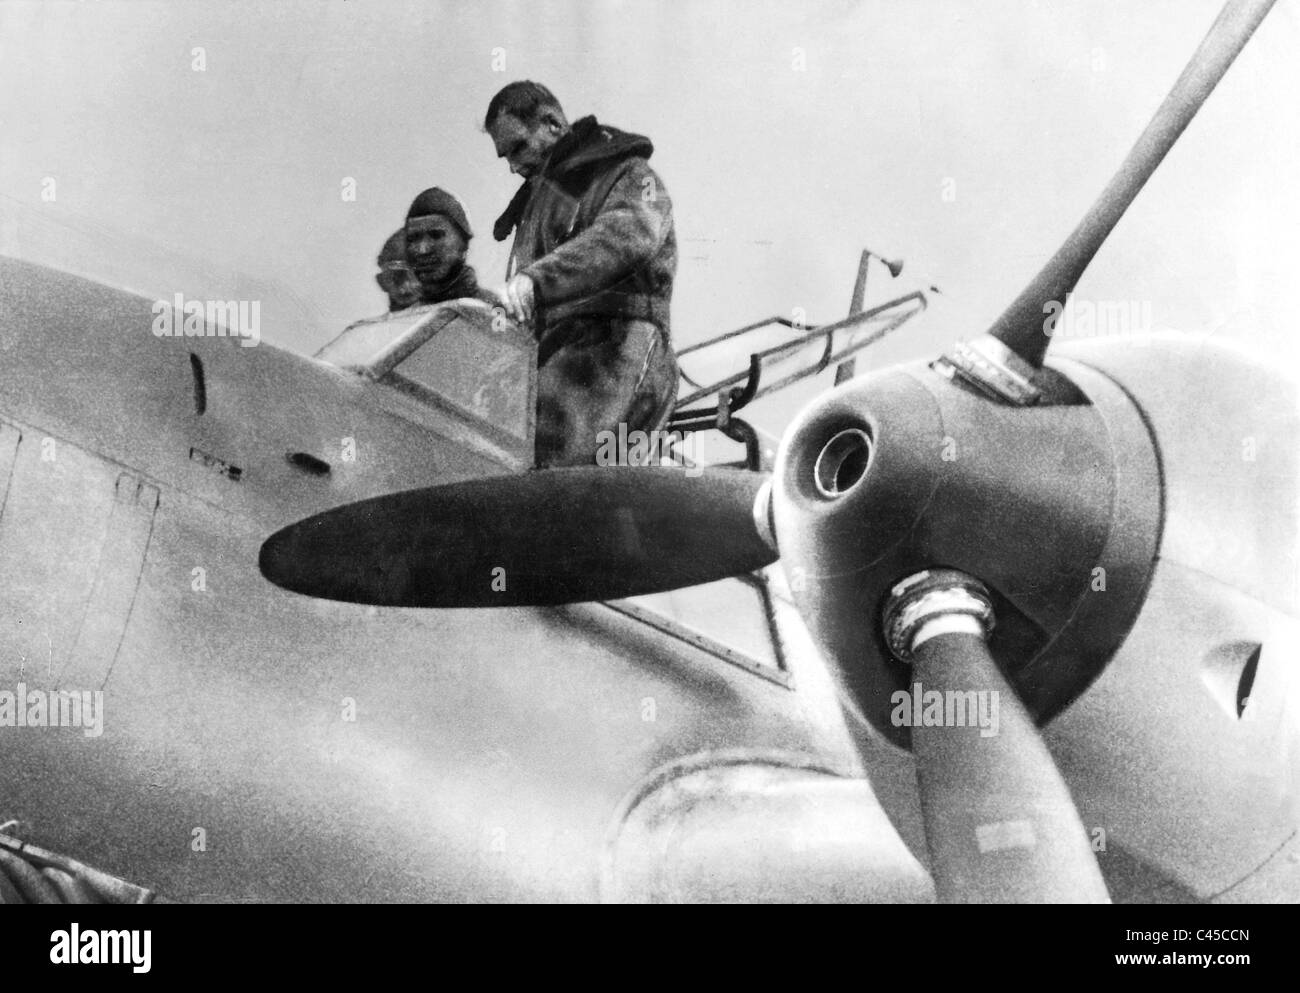 Image result for rudolf hess in messerschmitt in early 1941